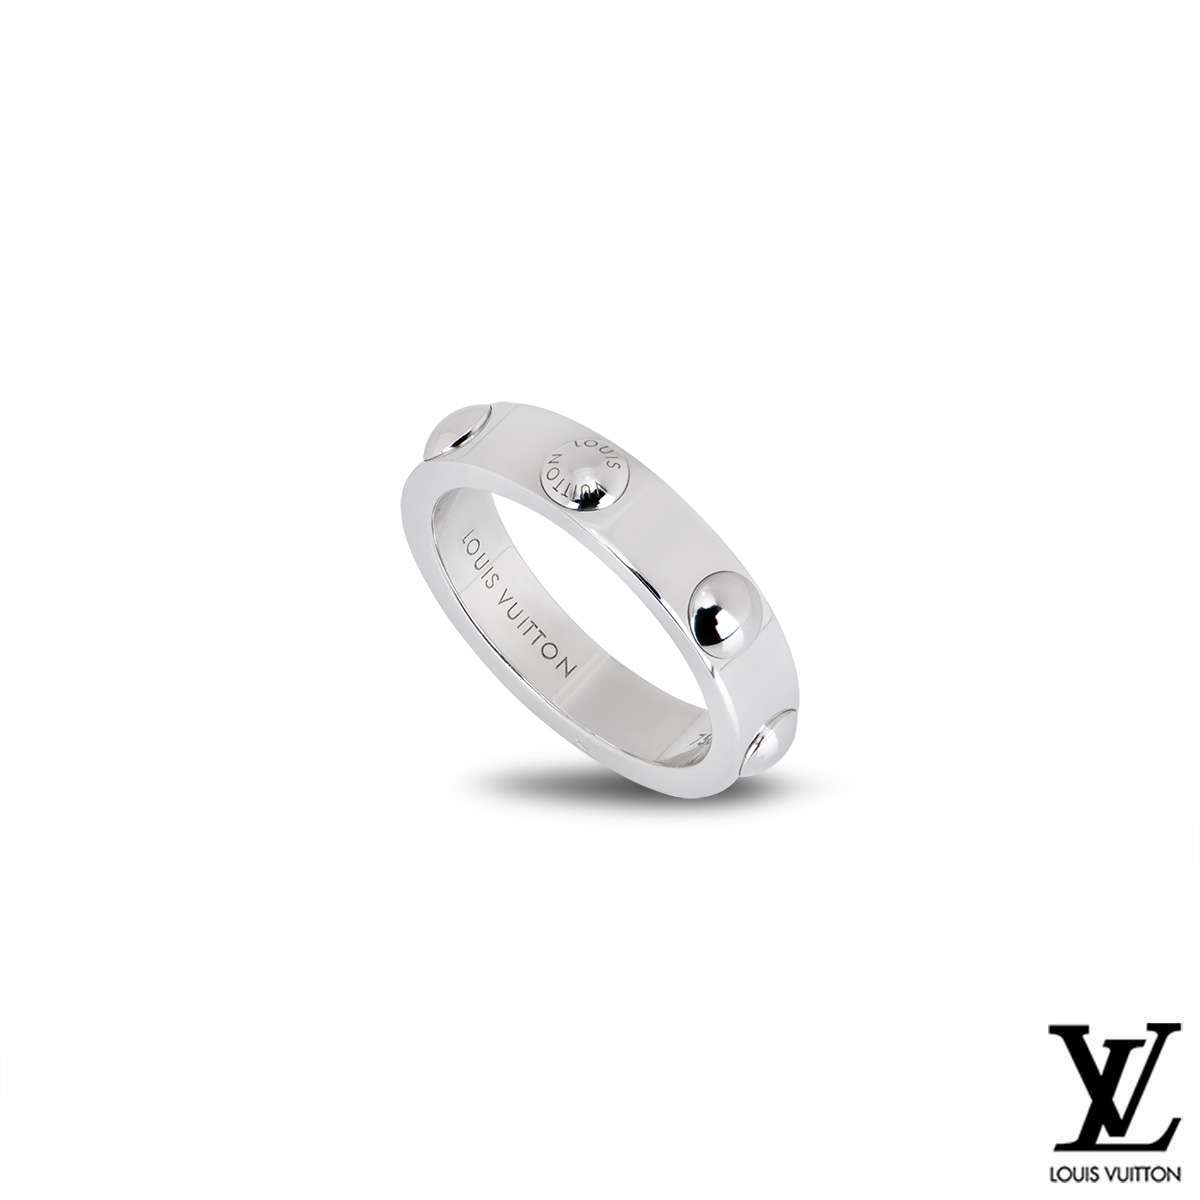 Louis Vuitton® Empreinte Ring, White Gold And Diamonds  Louis vuitton  jewelry, Louis vuitton empreinte, Womens jewelry rings